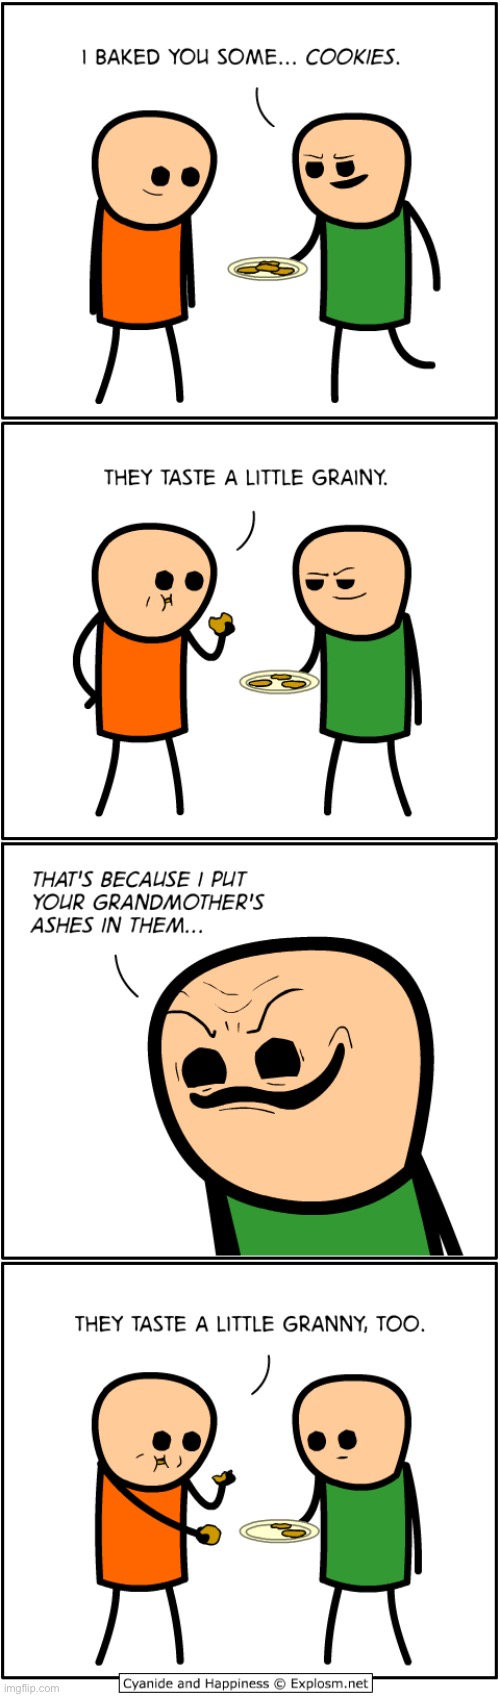 Haha | image tagged in cyanide and happiness | made w/ Imgflip meme maker